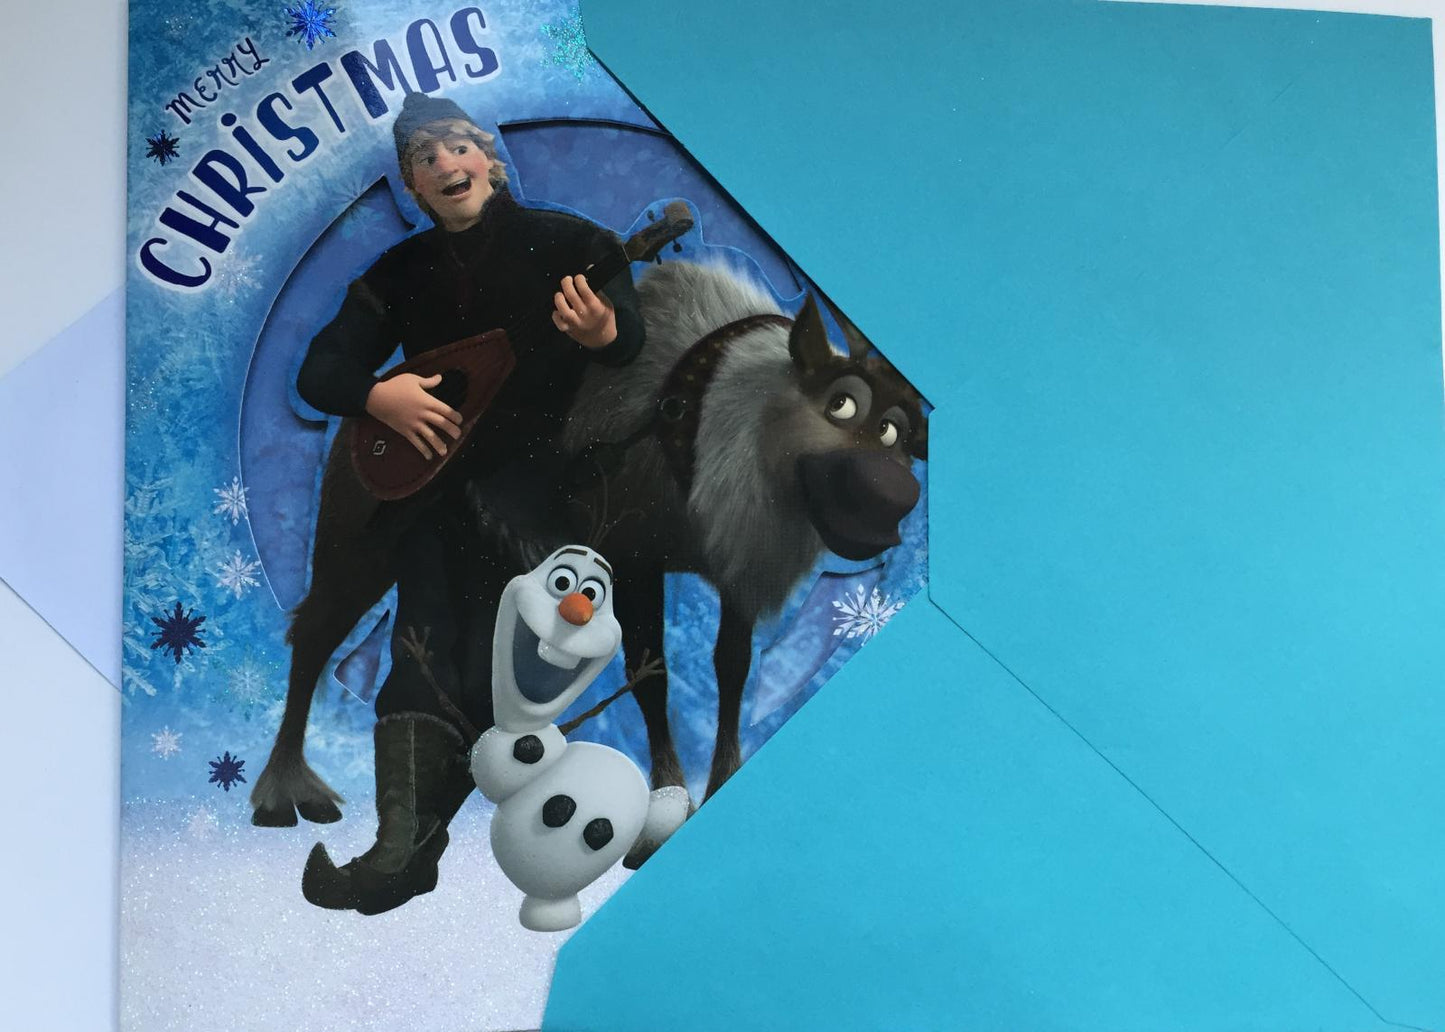 "Merry Christmas Meet The Fun Experts" Disney's Frozen Christmas Card For Boys Featuring Olaf The Snowman, Kristoff And Sven The Reindeer 